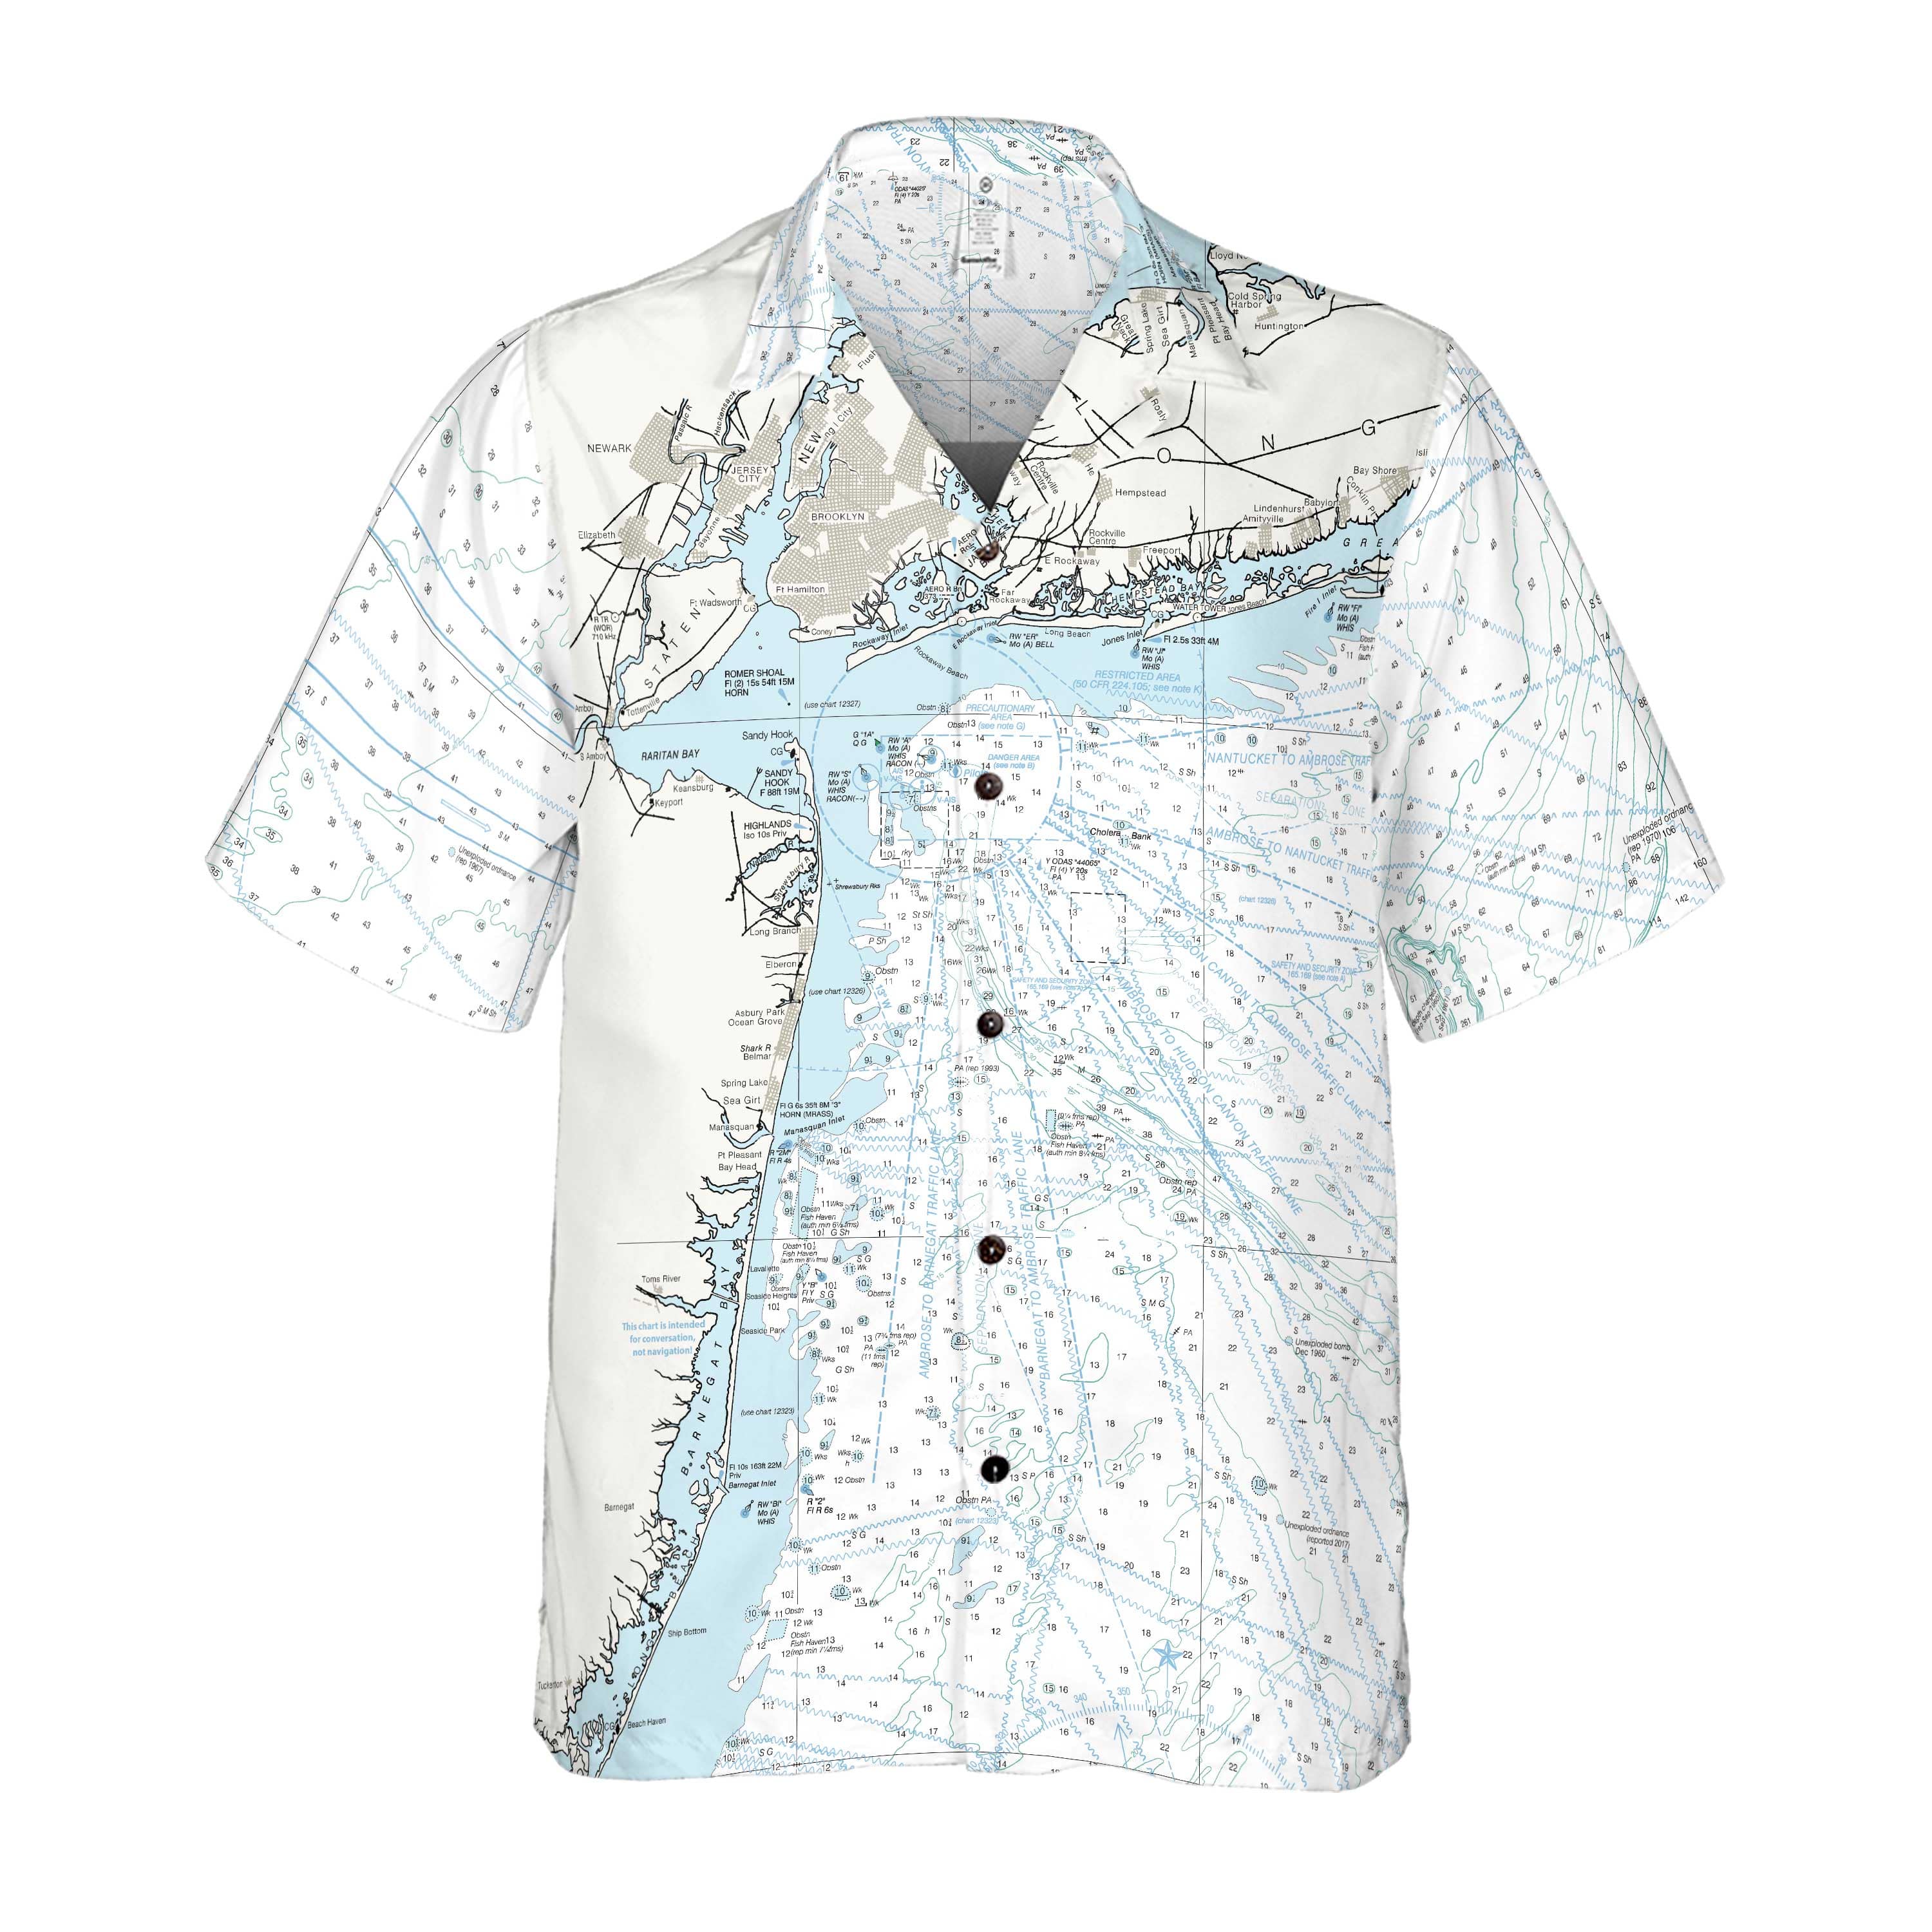 The New Jersey and Long Island Navigator Coconut Button Camp Shirt